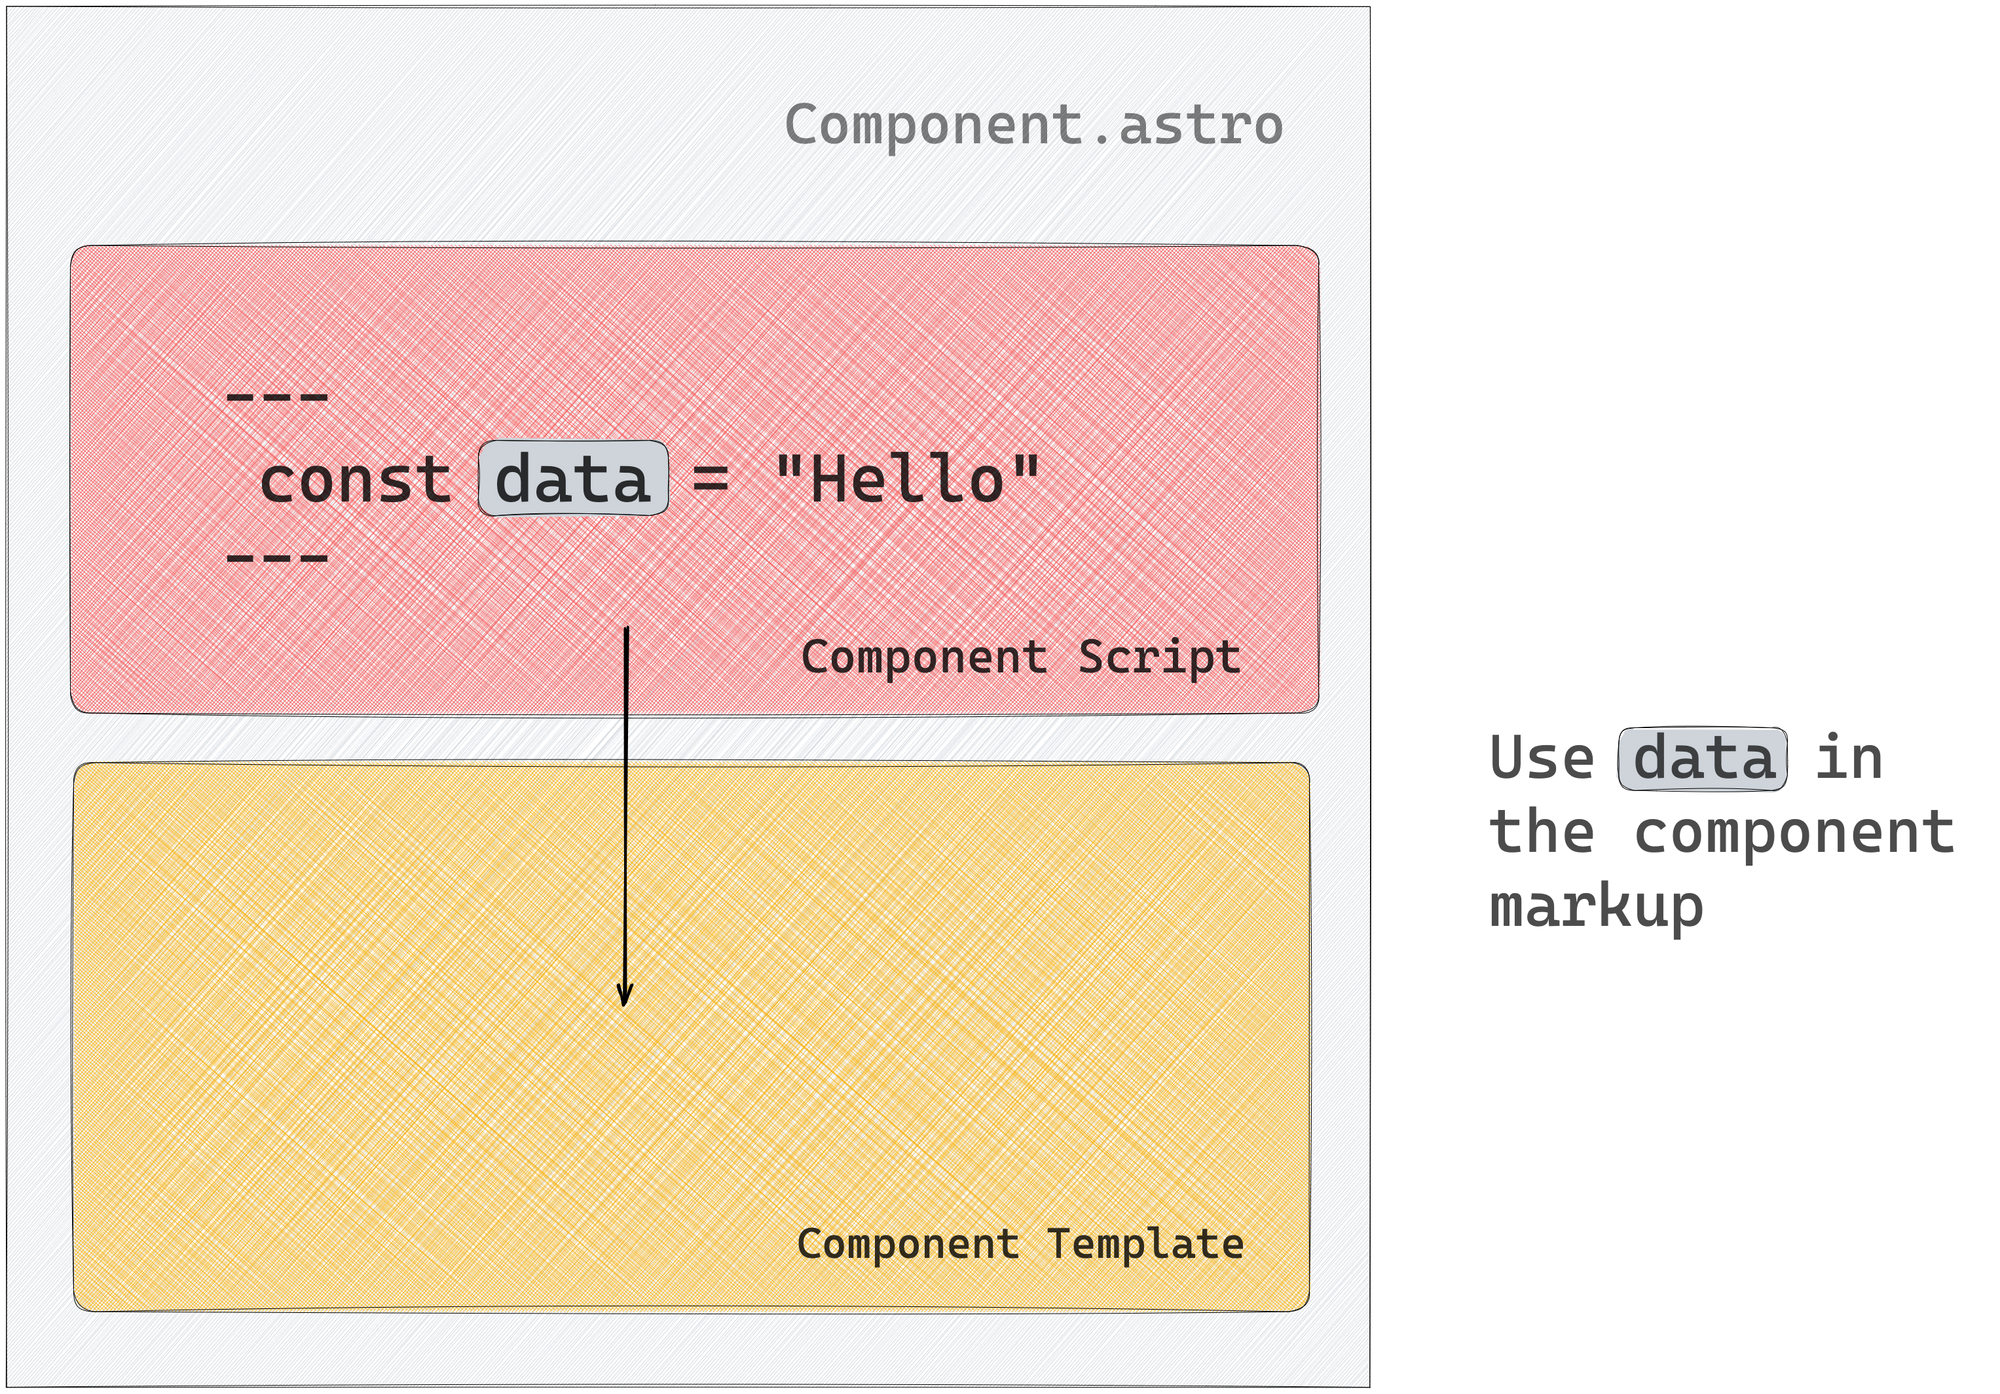 Leverage values from the component script section in the component template